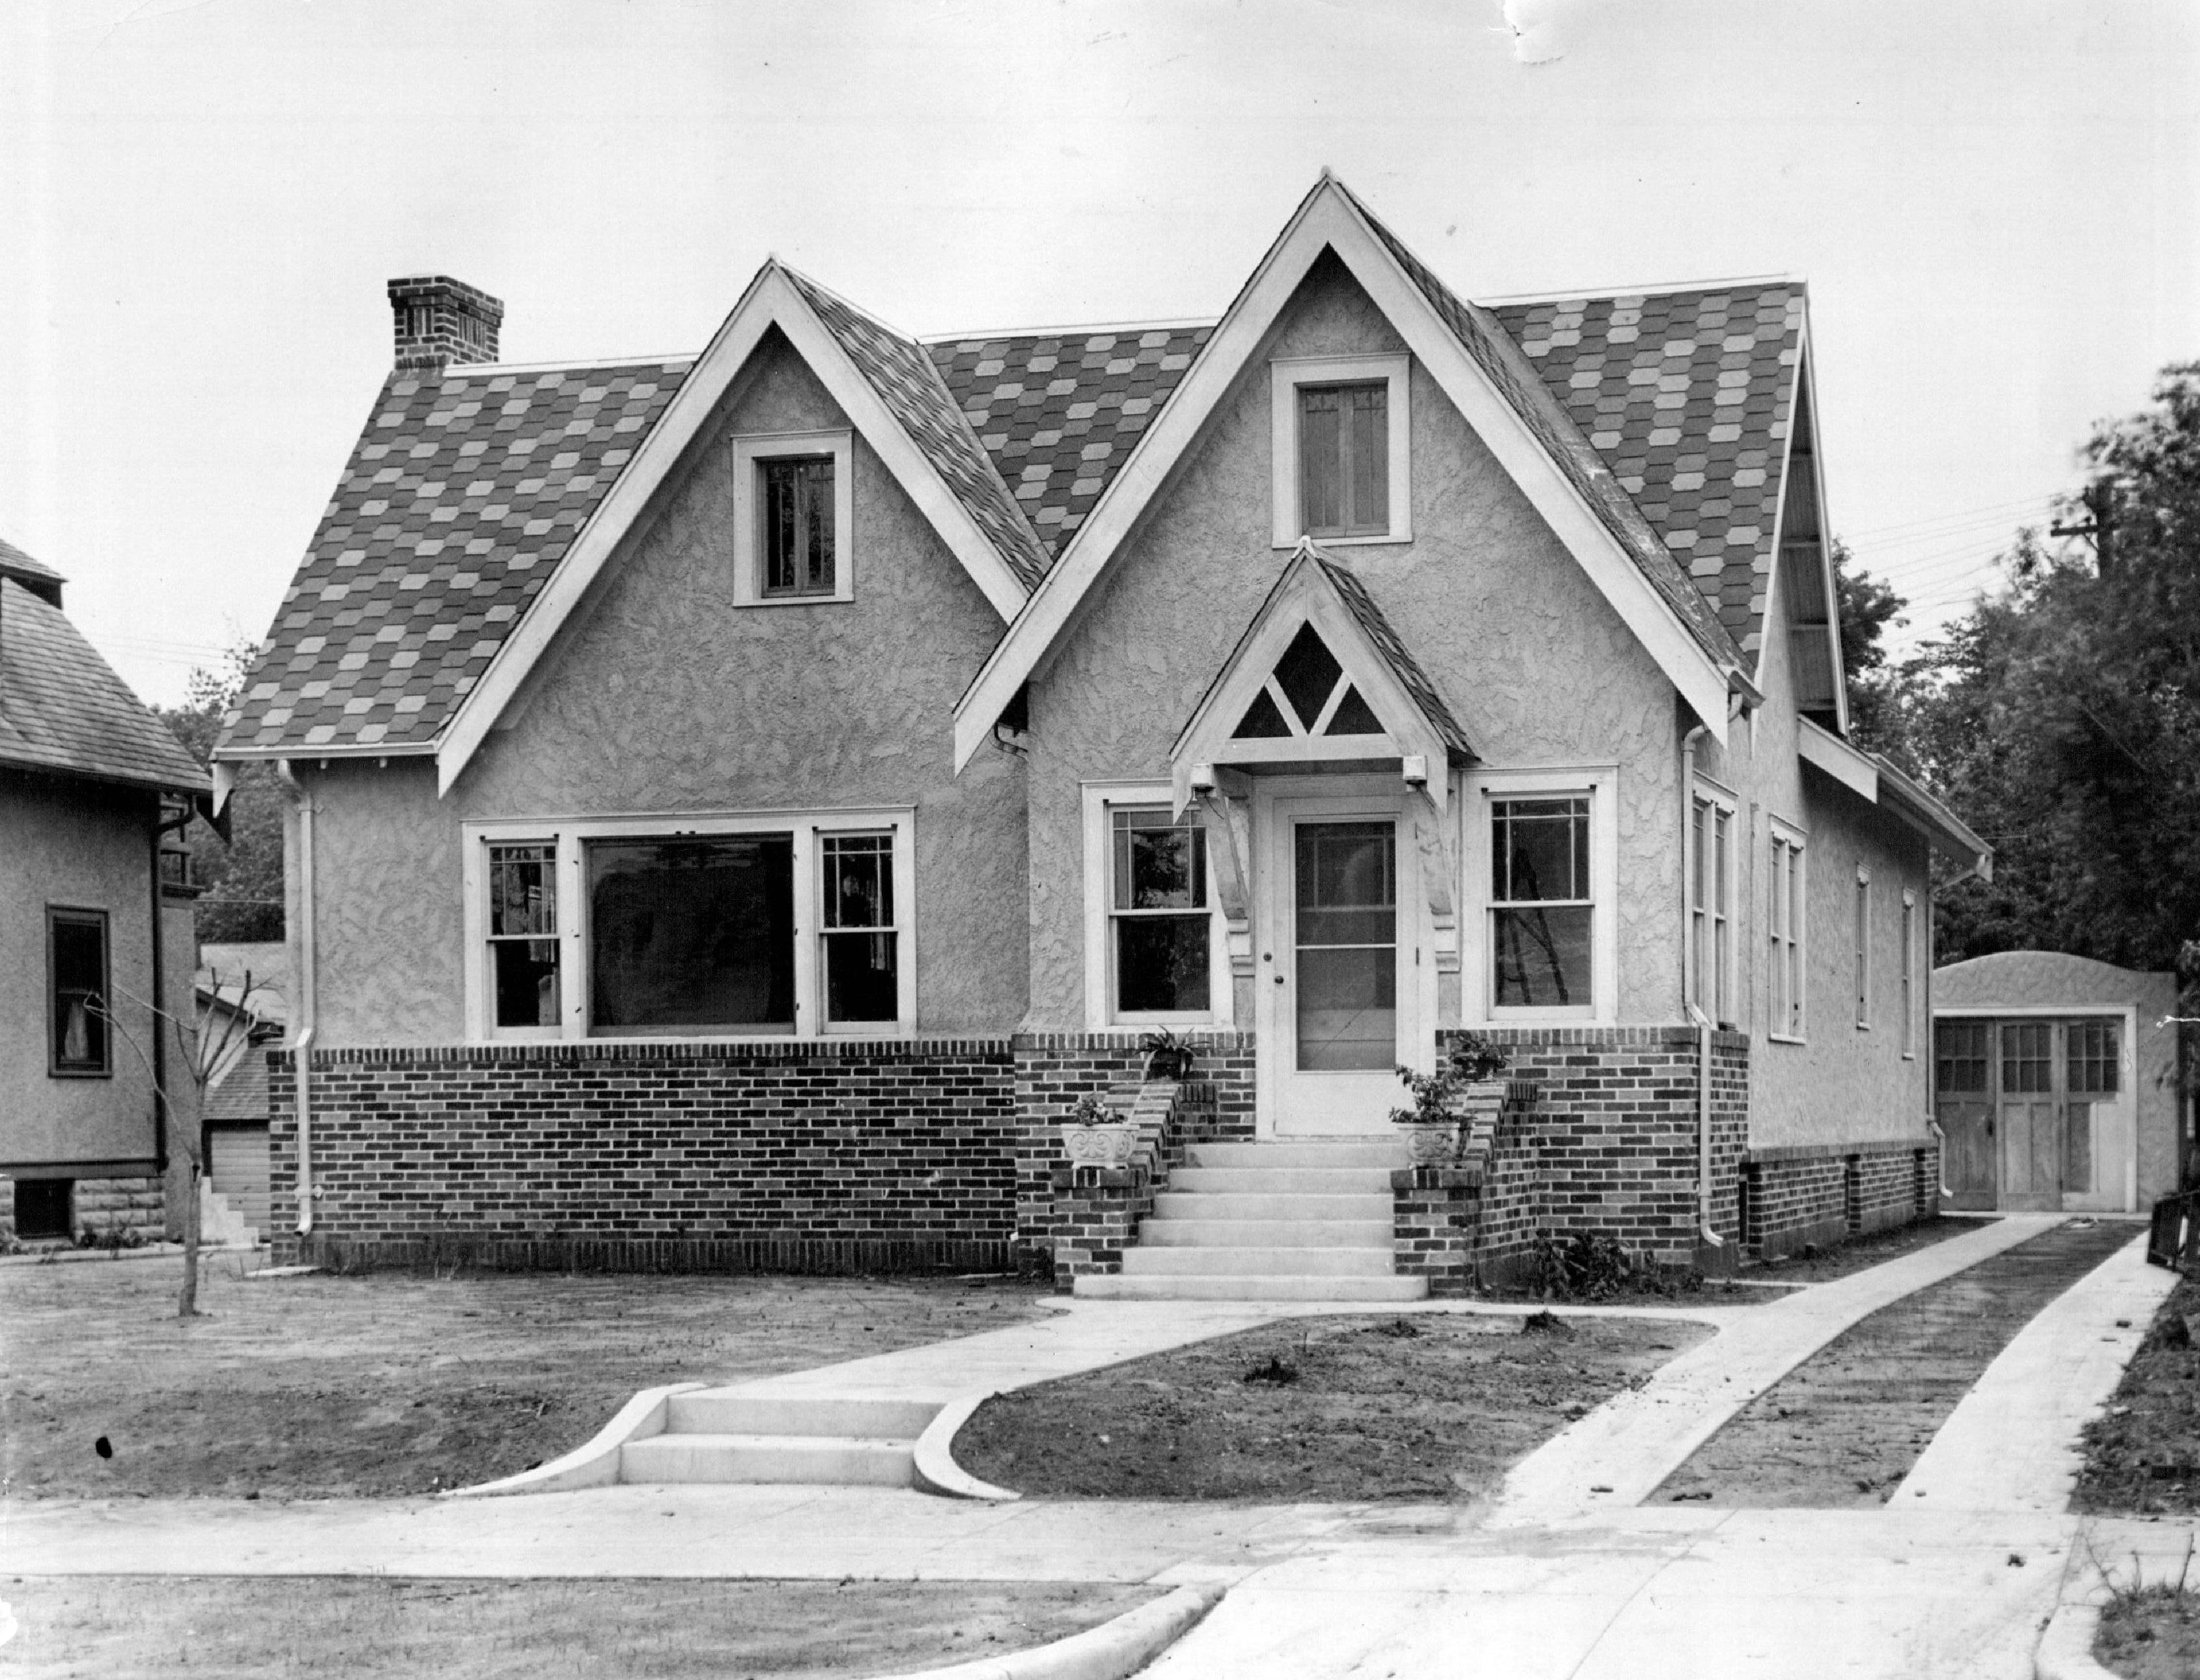 A stucco and brick home in south Minneapolis, photographed in 1926.